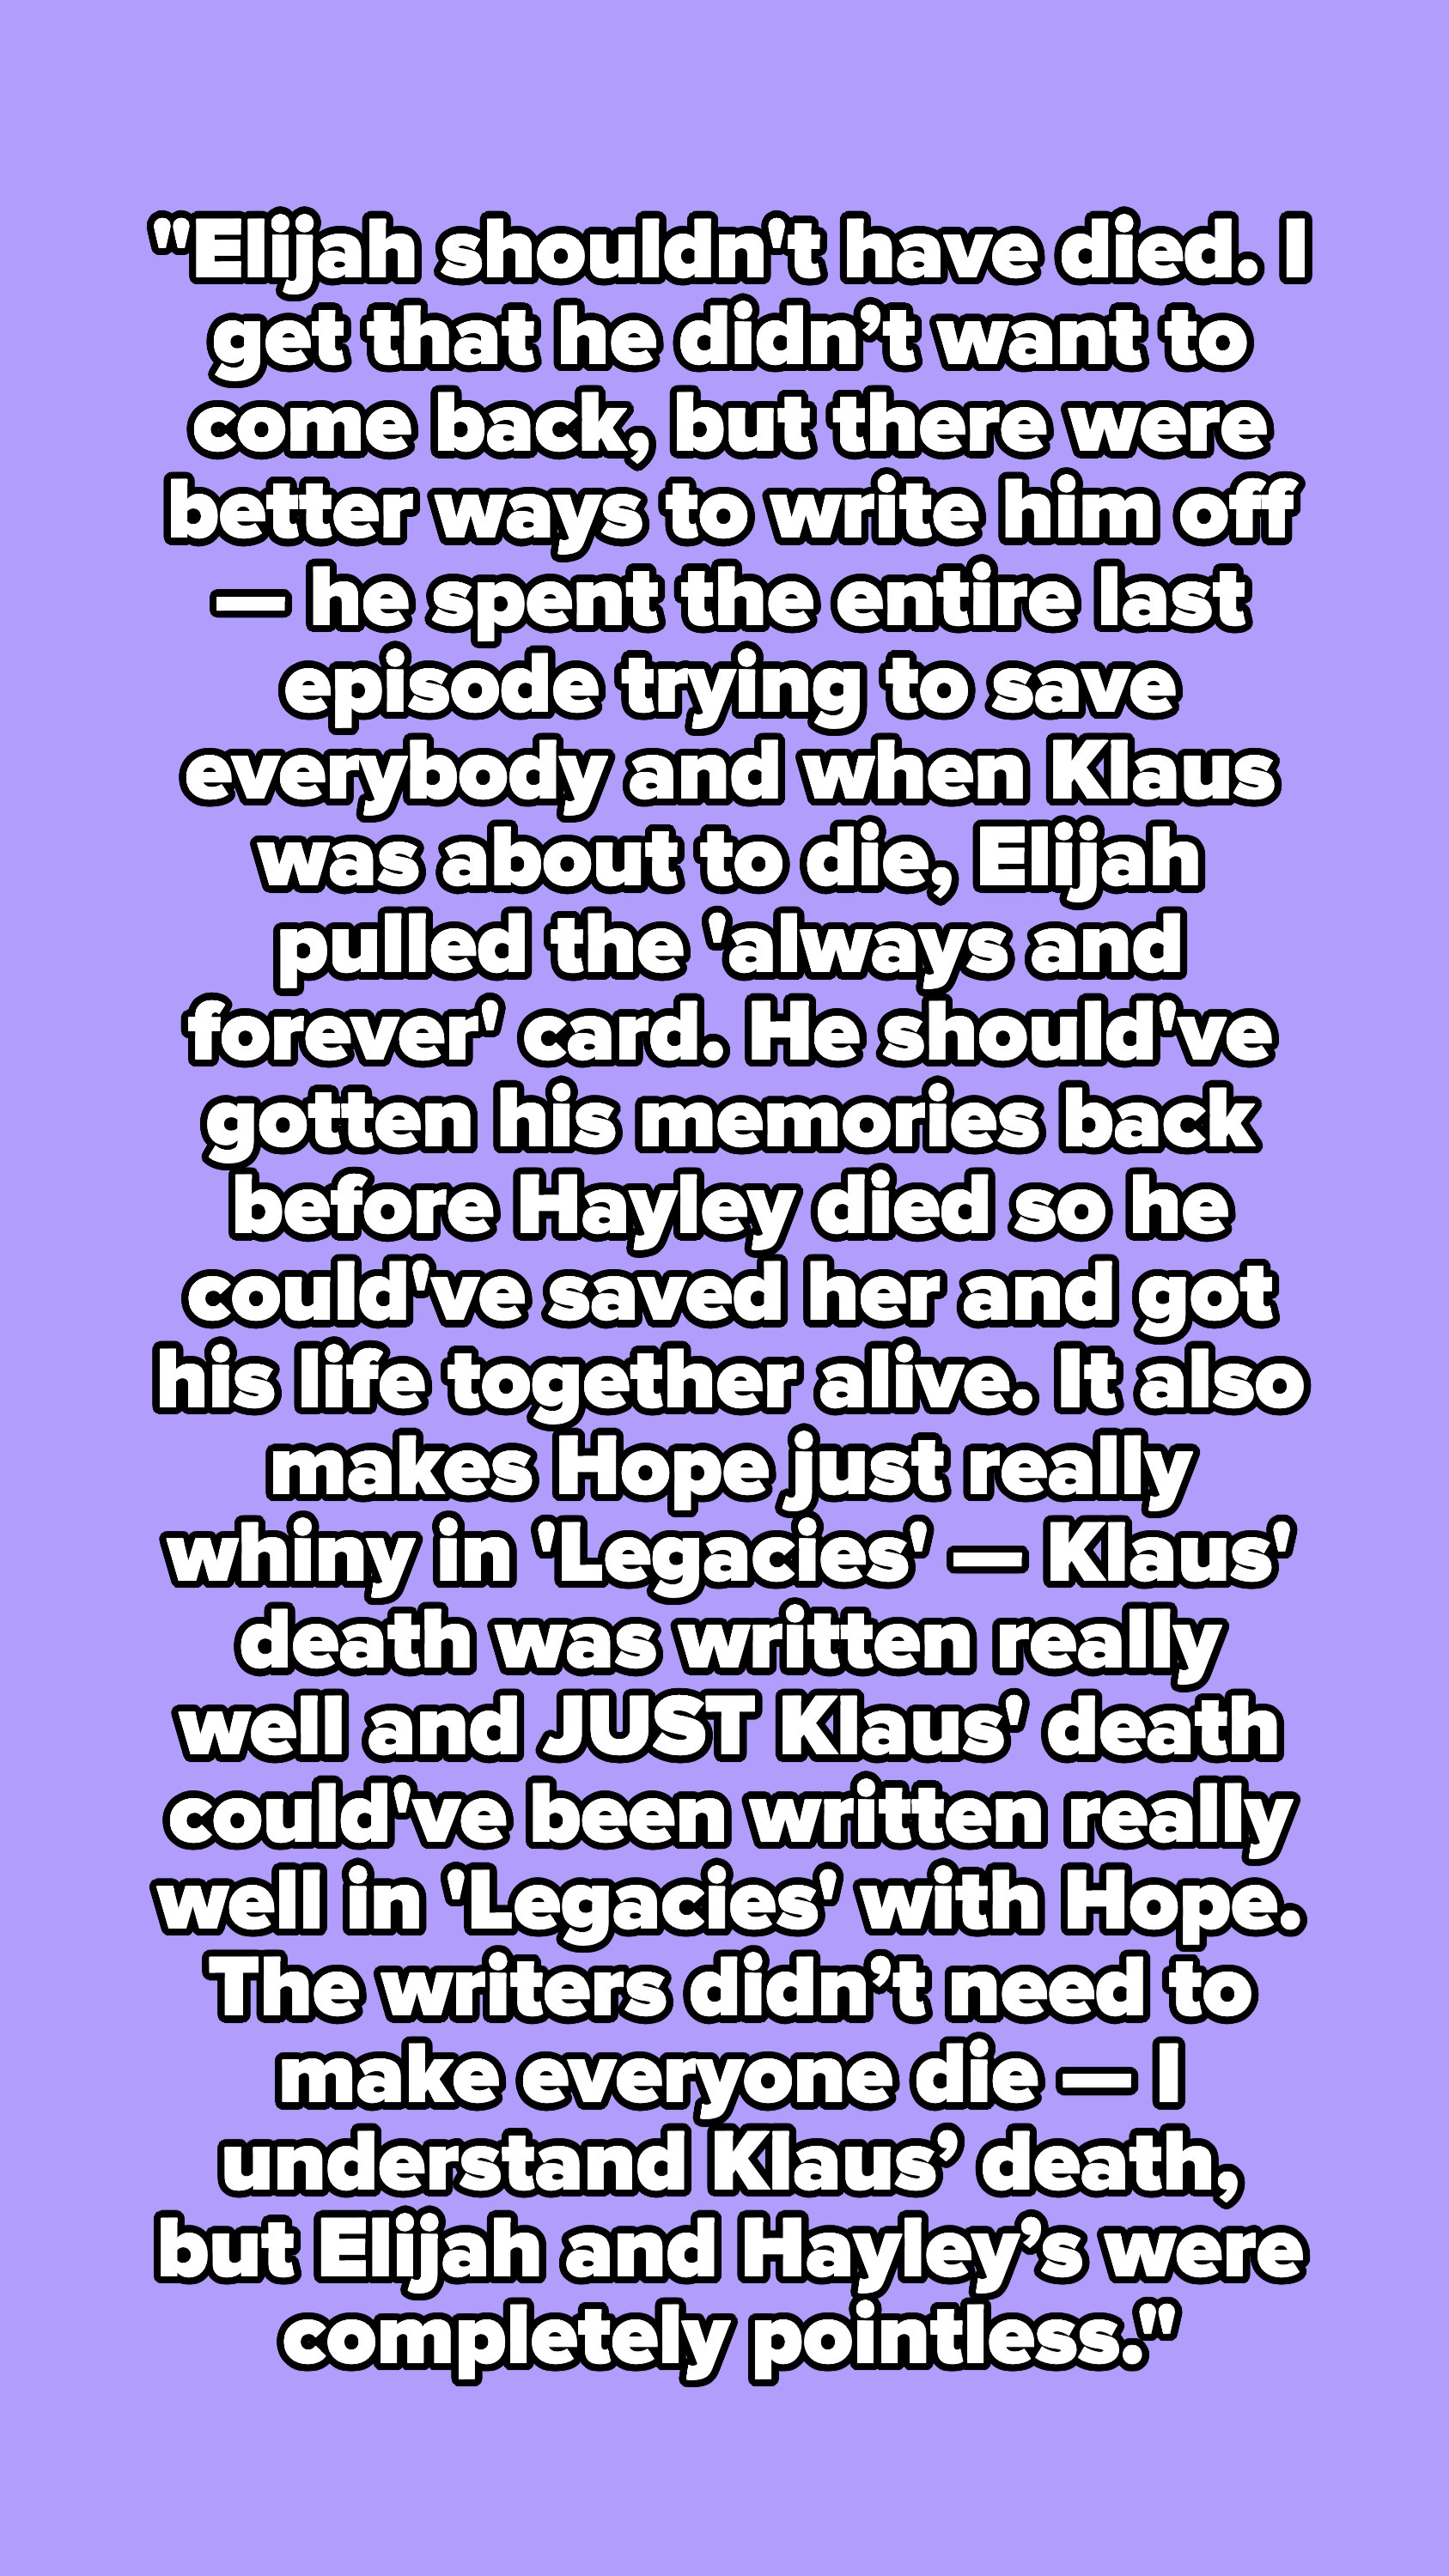 &quot;Elijah shouldn&#x27;t have died. I get that he didn’t want to come back, but there were better ways to write him off.&quot;